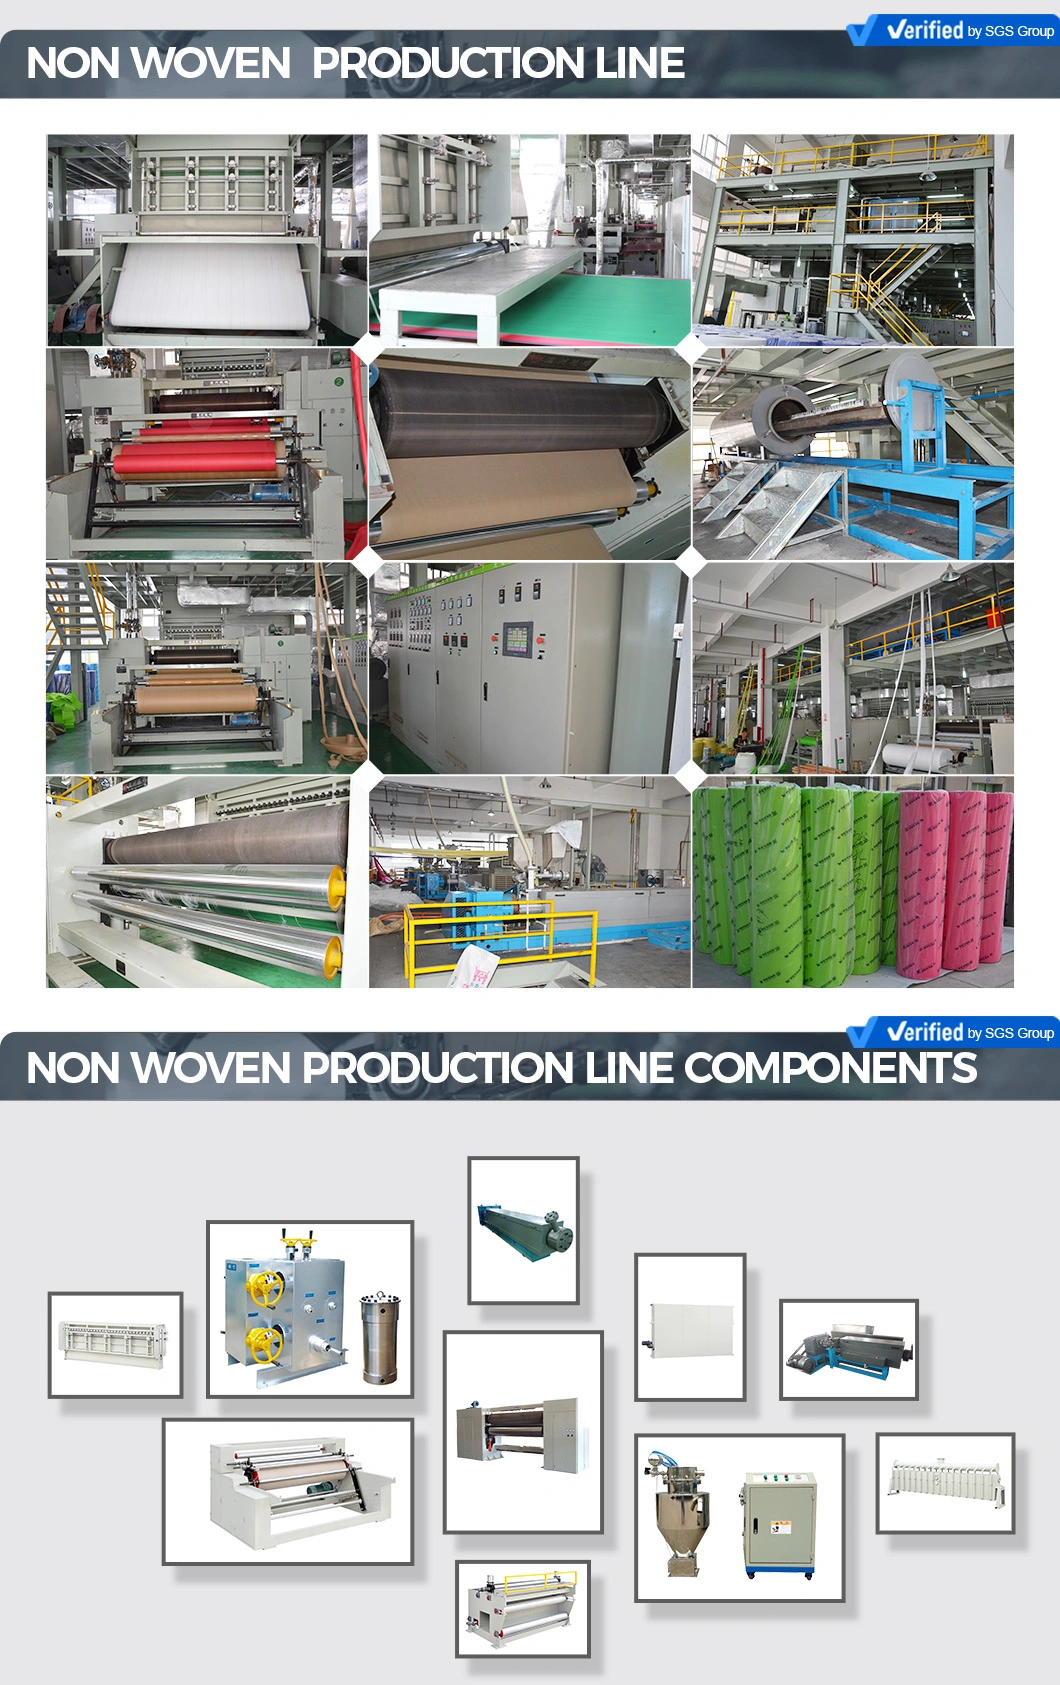 Fully Weaving Non Woven Production Line Machines